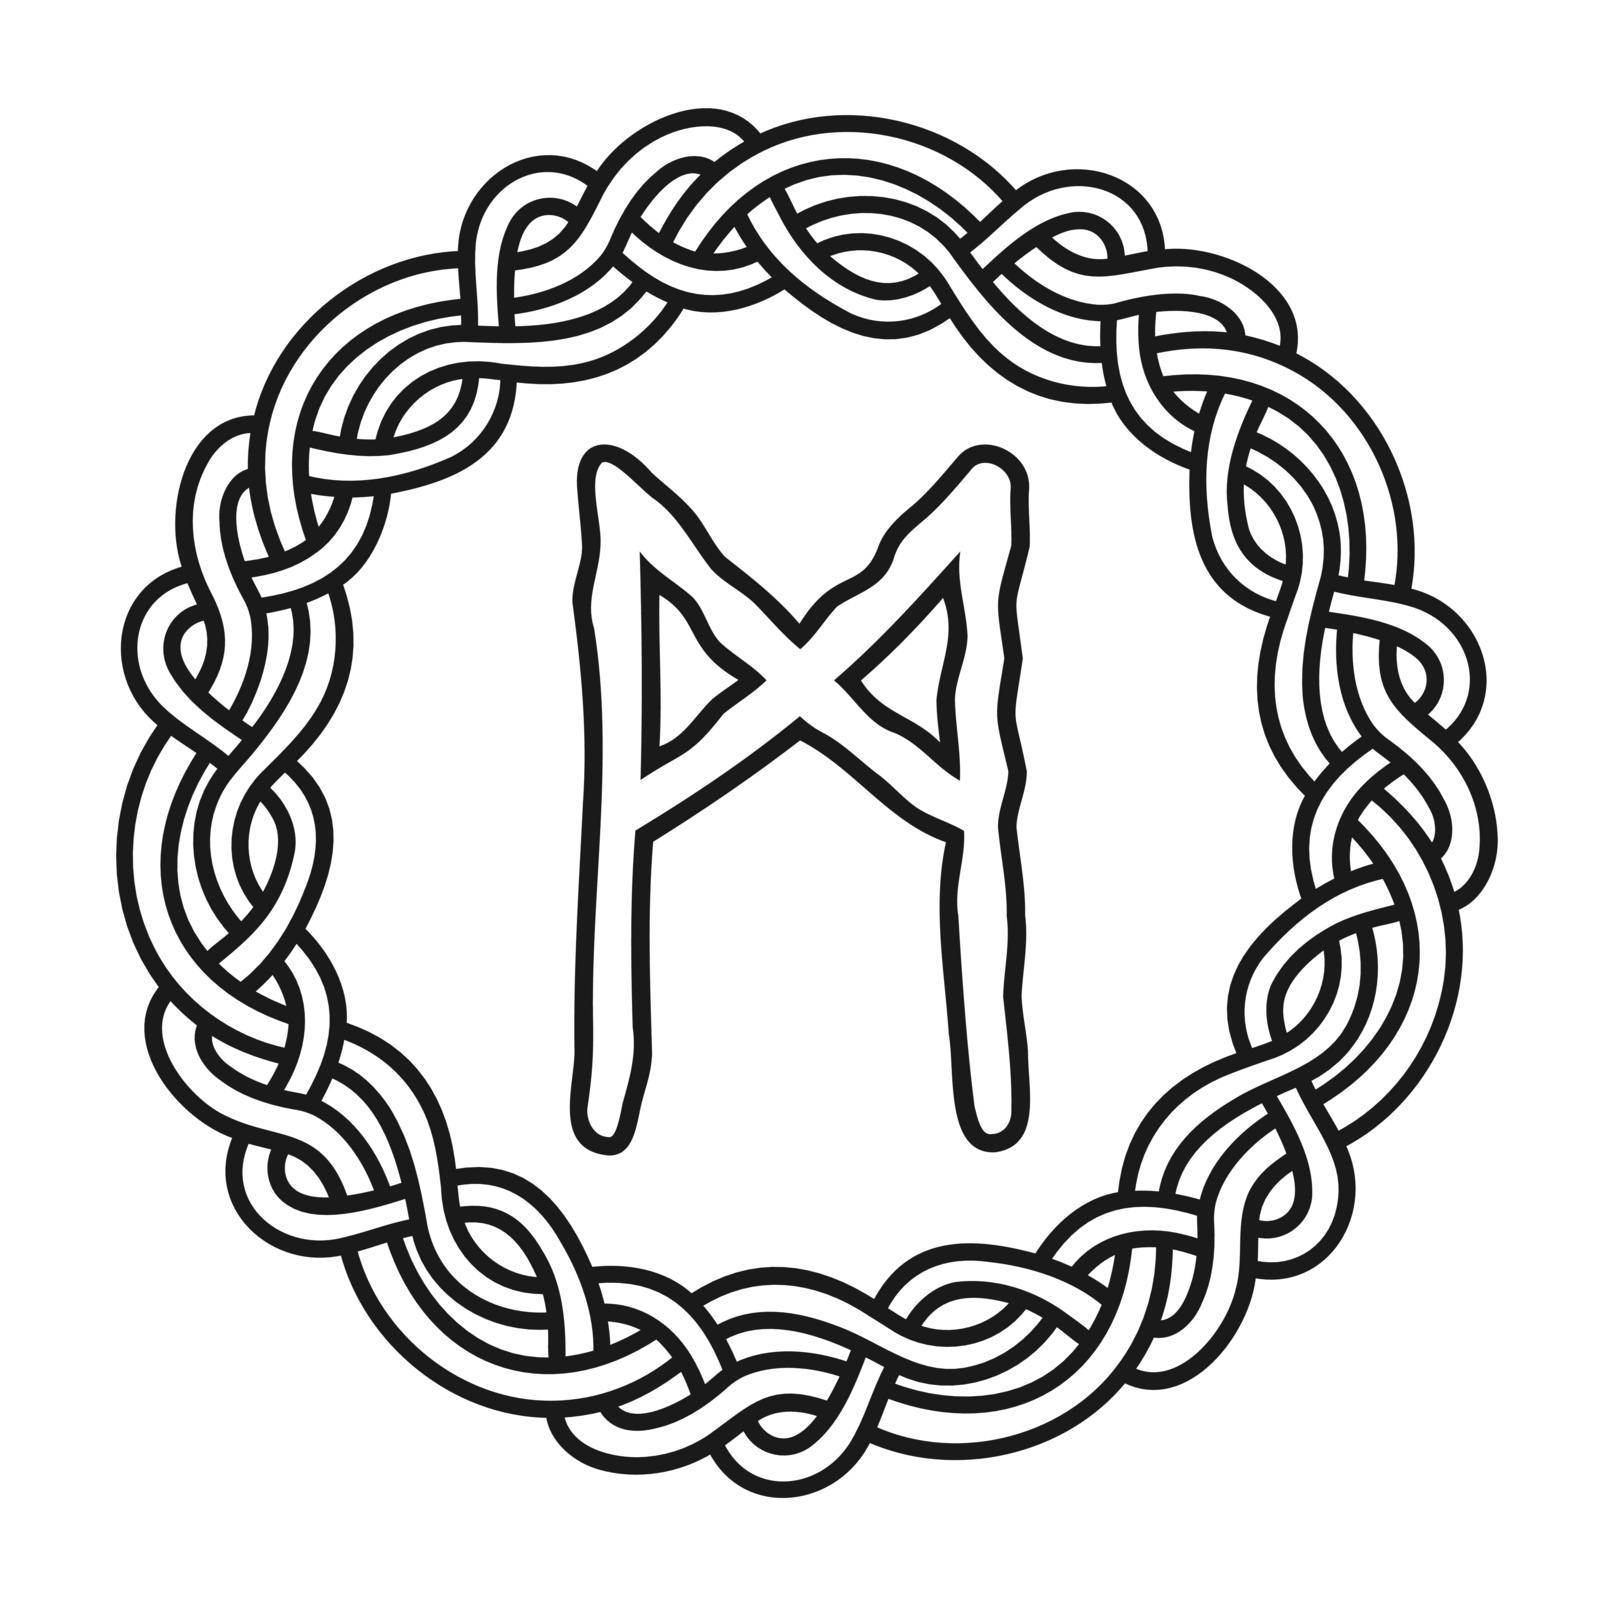 Rune Mannaz in a circle - an ancient Scandinavian symbol or sign, amulet. Viking writing. Hand drawn outline vector illustration for websites, games, engraving and print. by Pyromaster